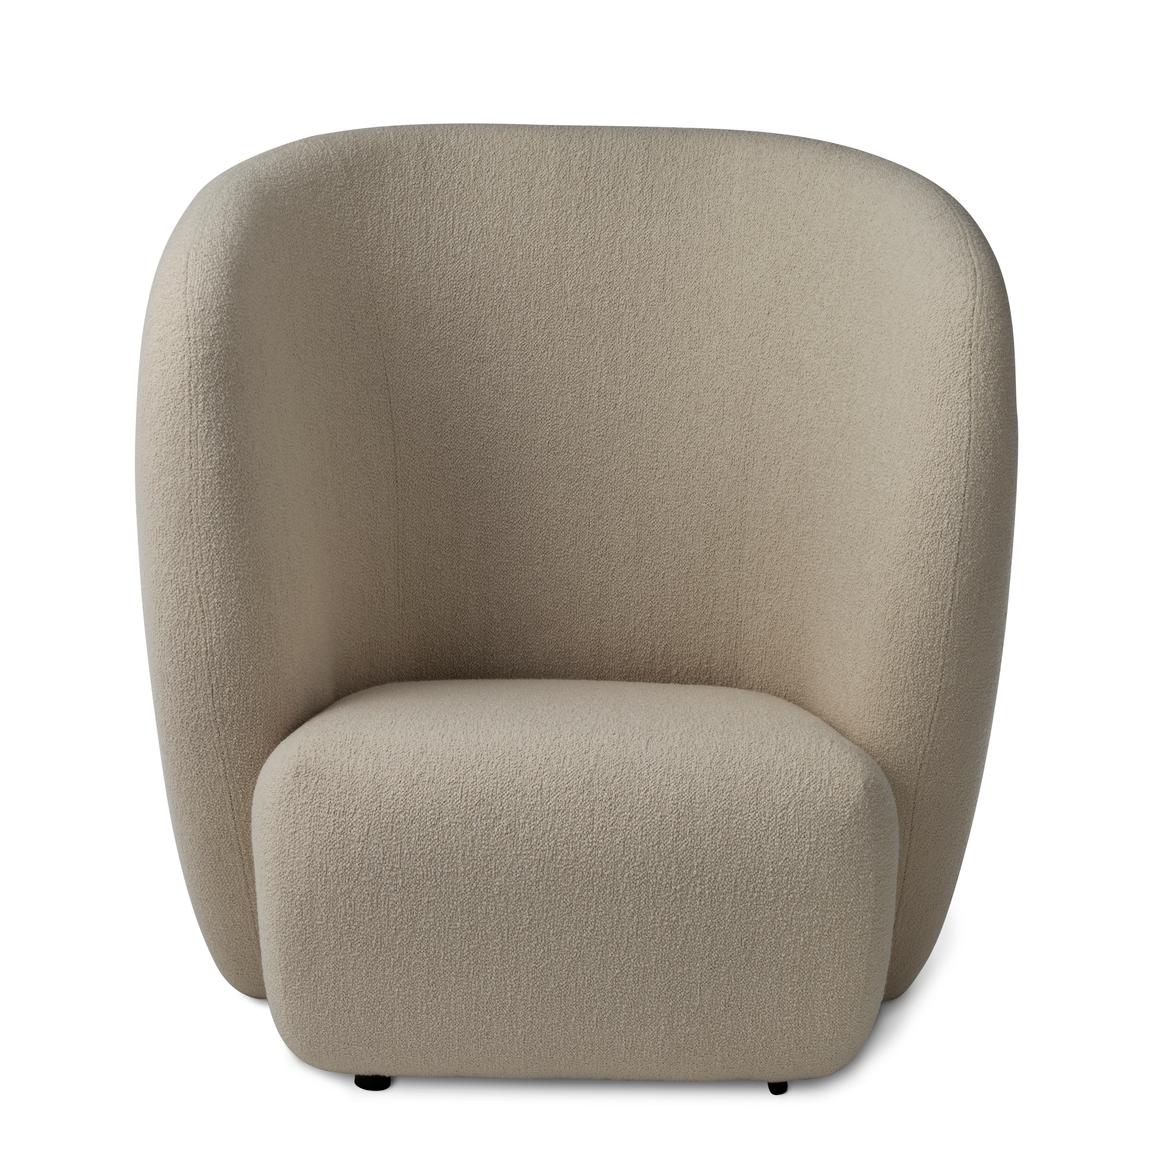 Haven Lounge chair sand by Warm Nordic
Dimensions: D107 x W84 x H 110 cm
Material: Textile upholstery, Foam, Spring system, Wood.
Weight: 50 kg
Also available in different colours and finishes. 

The Haven armchair is a contemporary chair with